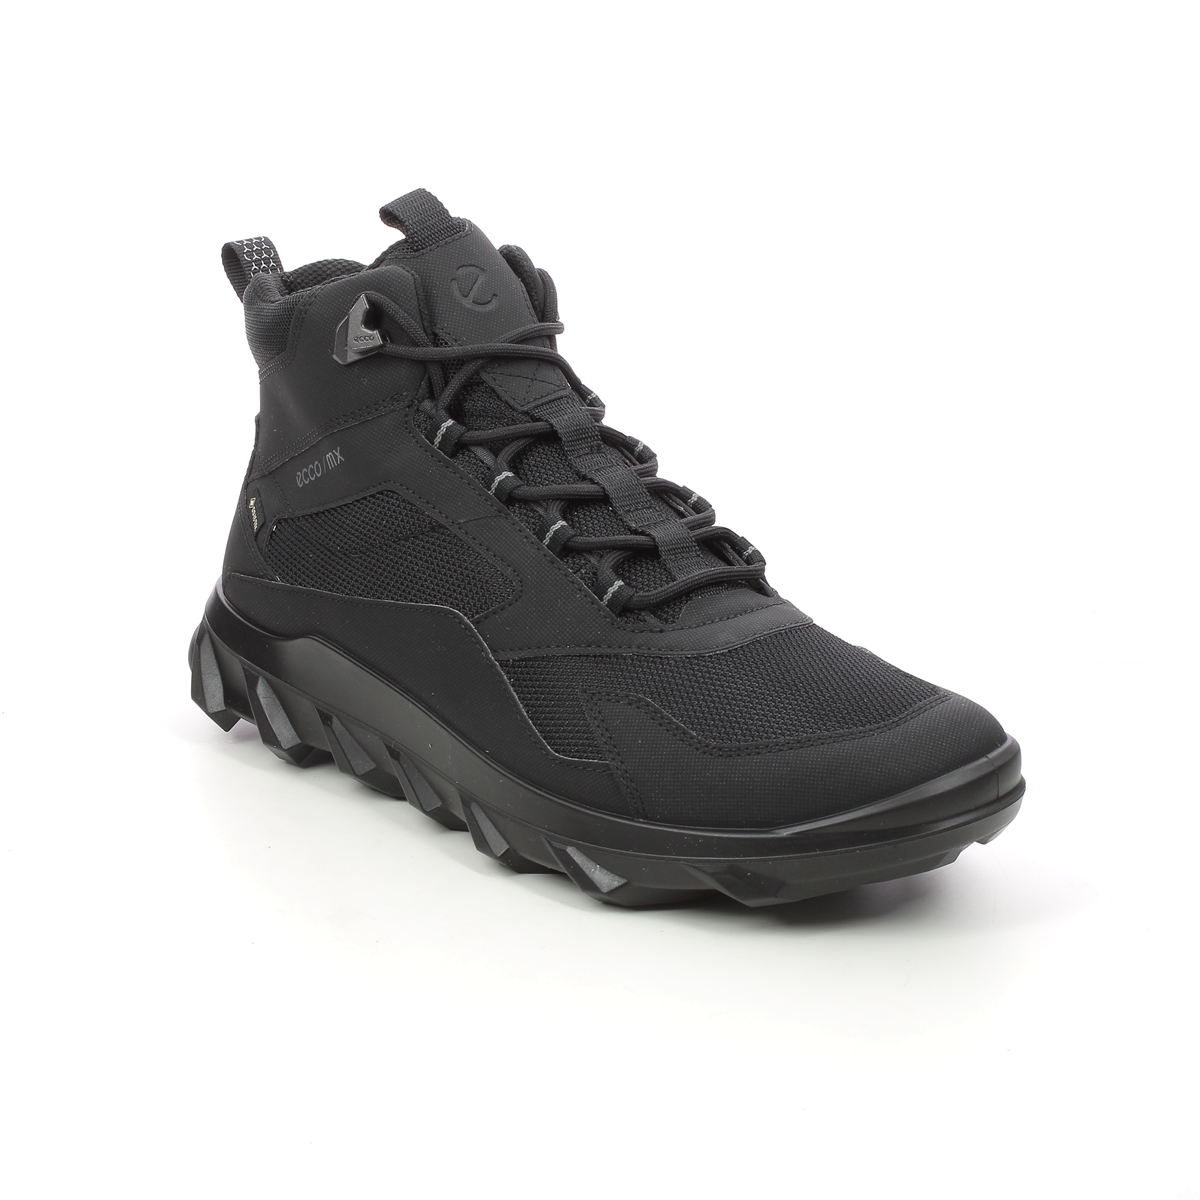 Ecco Mx Mid Mens Boot Gtx Black Mens Outdoor Walking Boots 820224-51052 In Size 42 In Plain Black